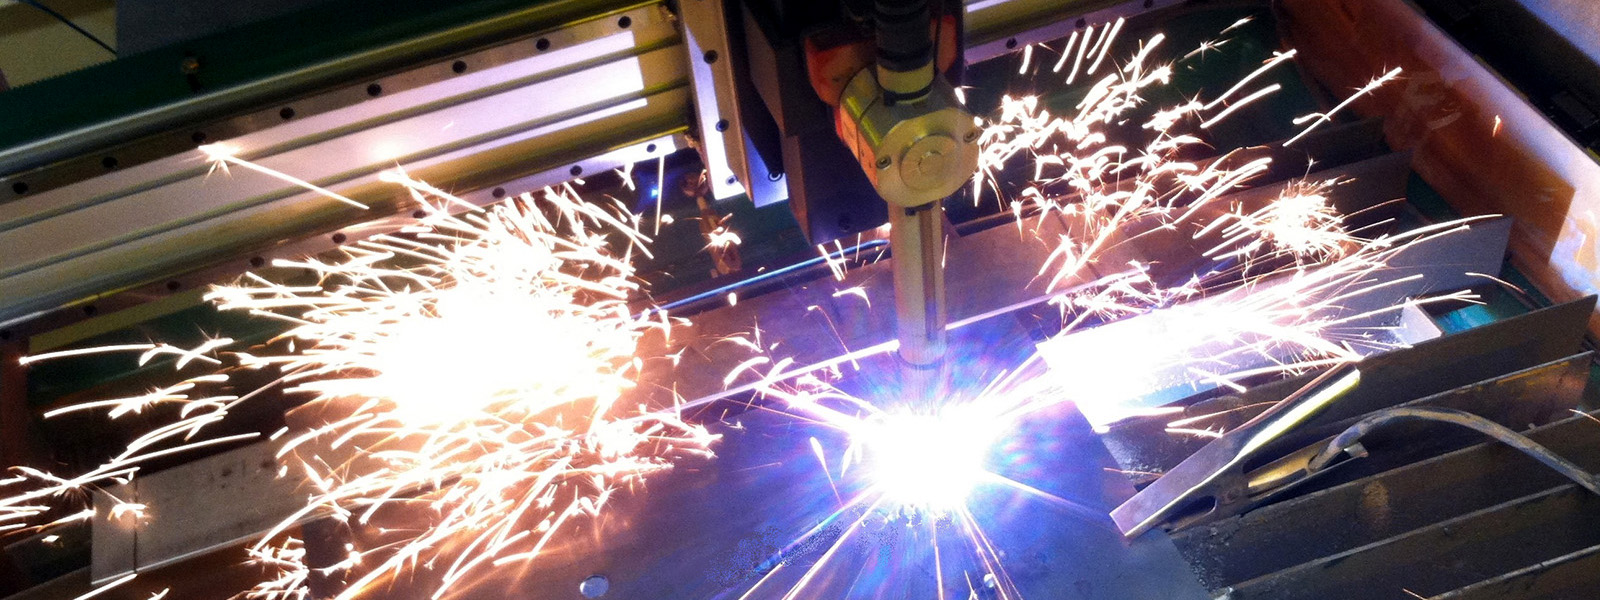 Image of a plasma cutter, while cutting, close-up